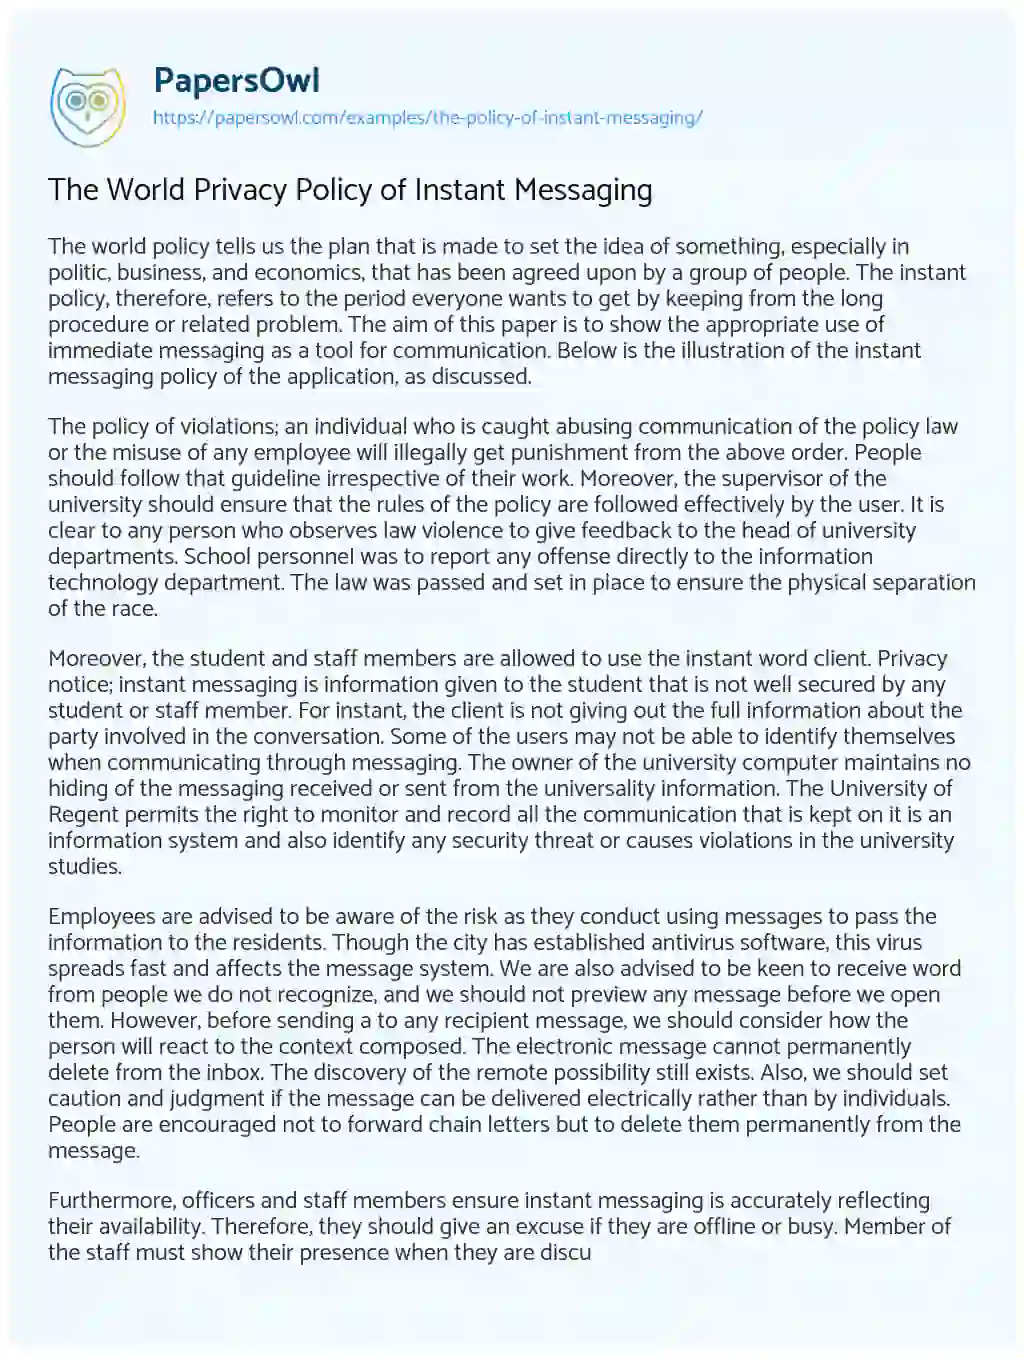 Essay on The World Privacy Policy of Instant Messaging